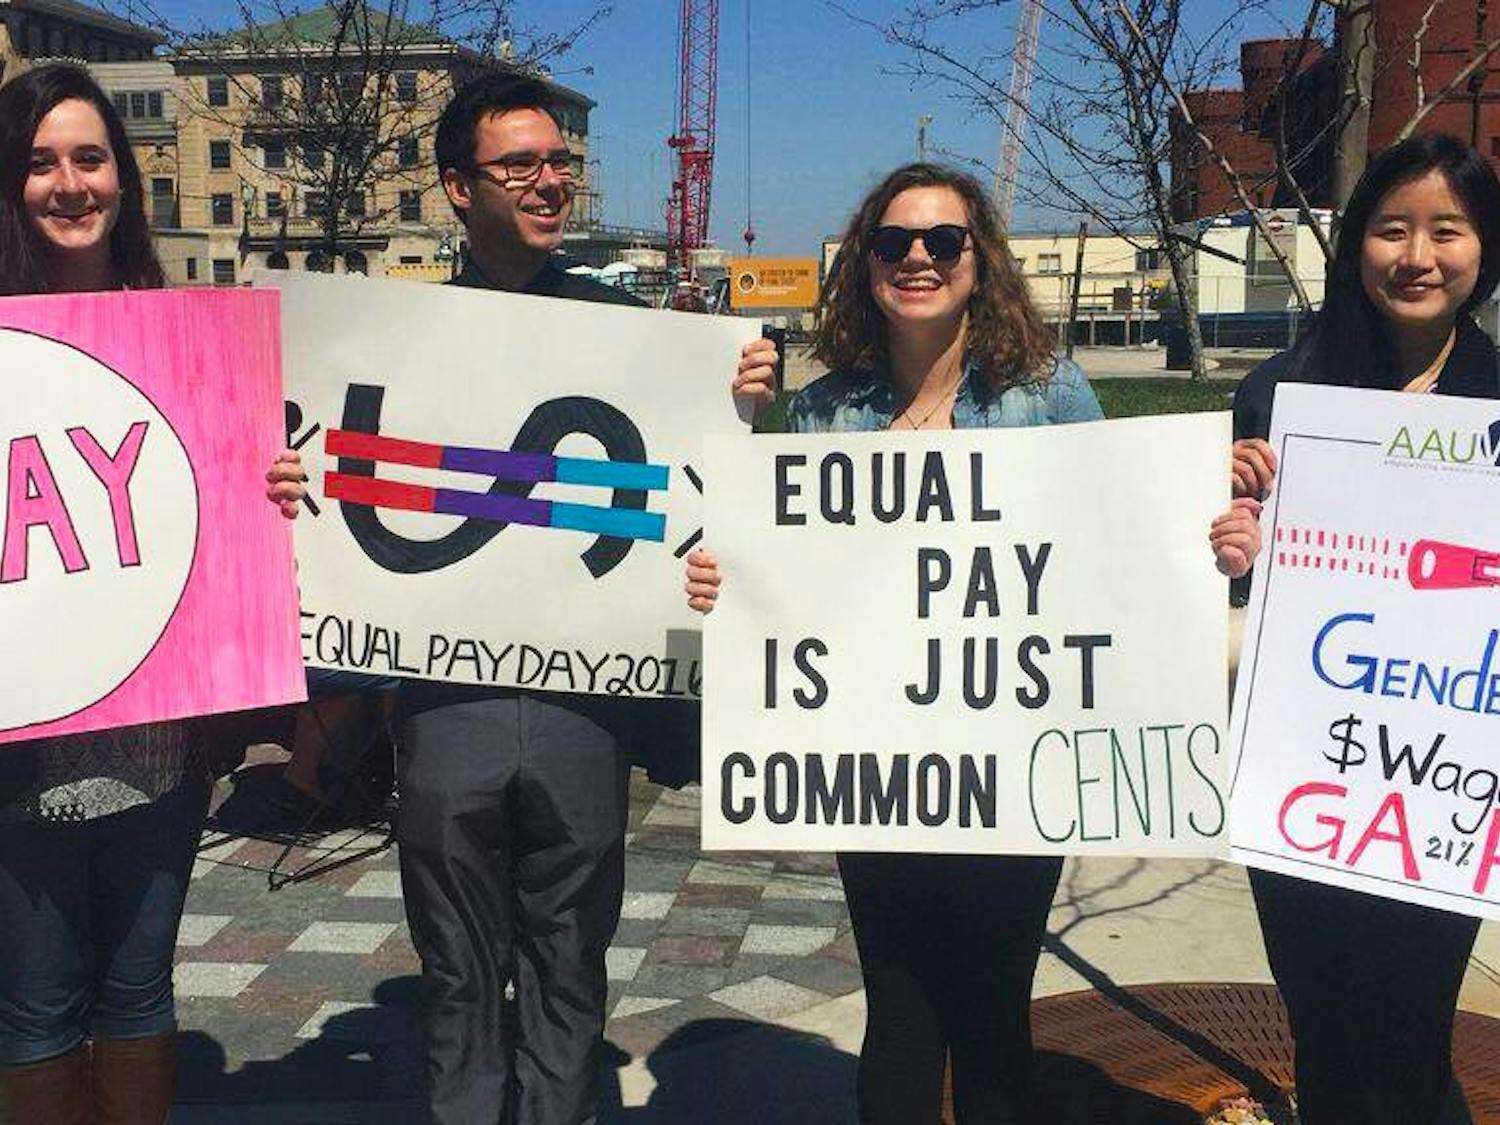 Students on Library Mall held signs and passed out buttons to spread awareness about gender inequalities in the workforce.